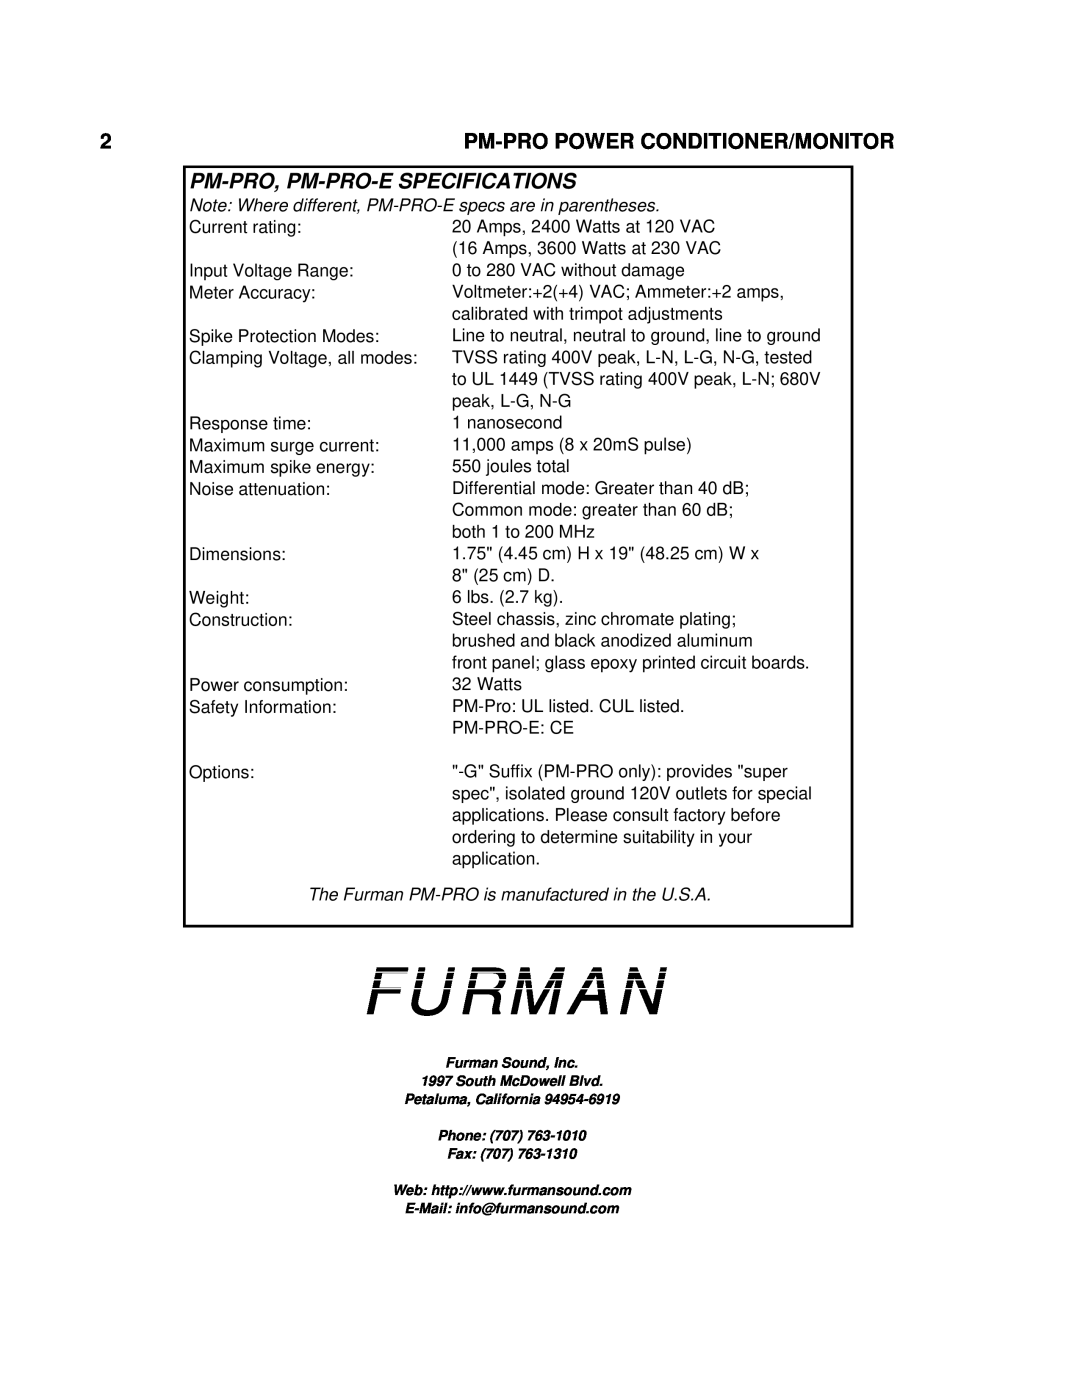 Furman Sound Furman, Pm-Pro Power Conditioner/Monitor, Note Where different, PM-PRO-E specs are in parentheses 